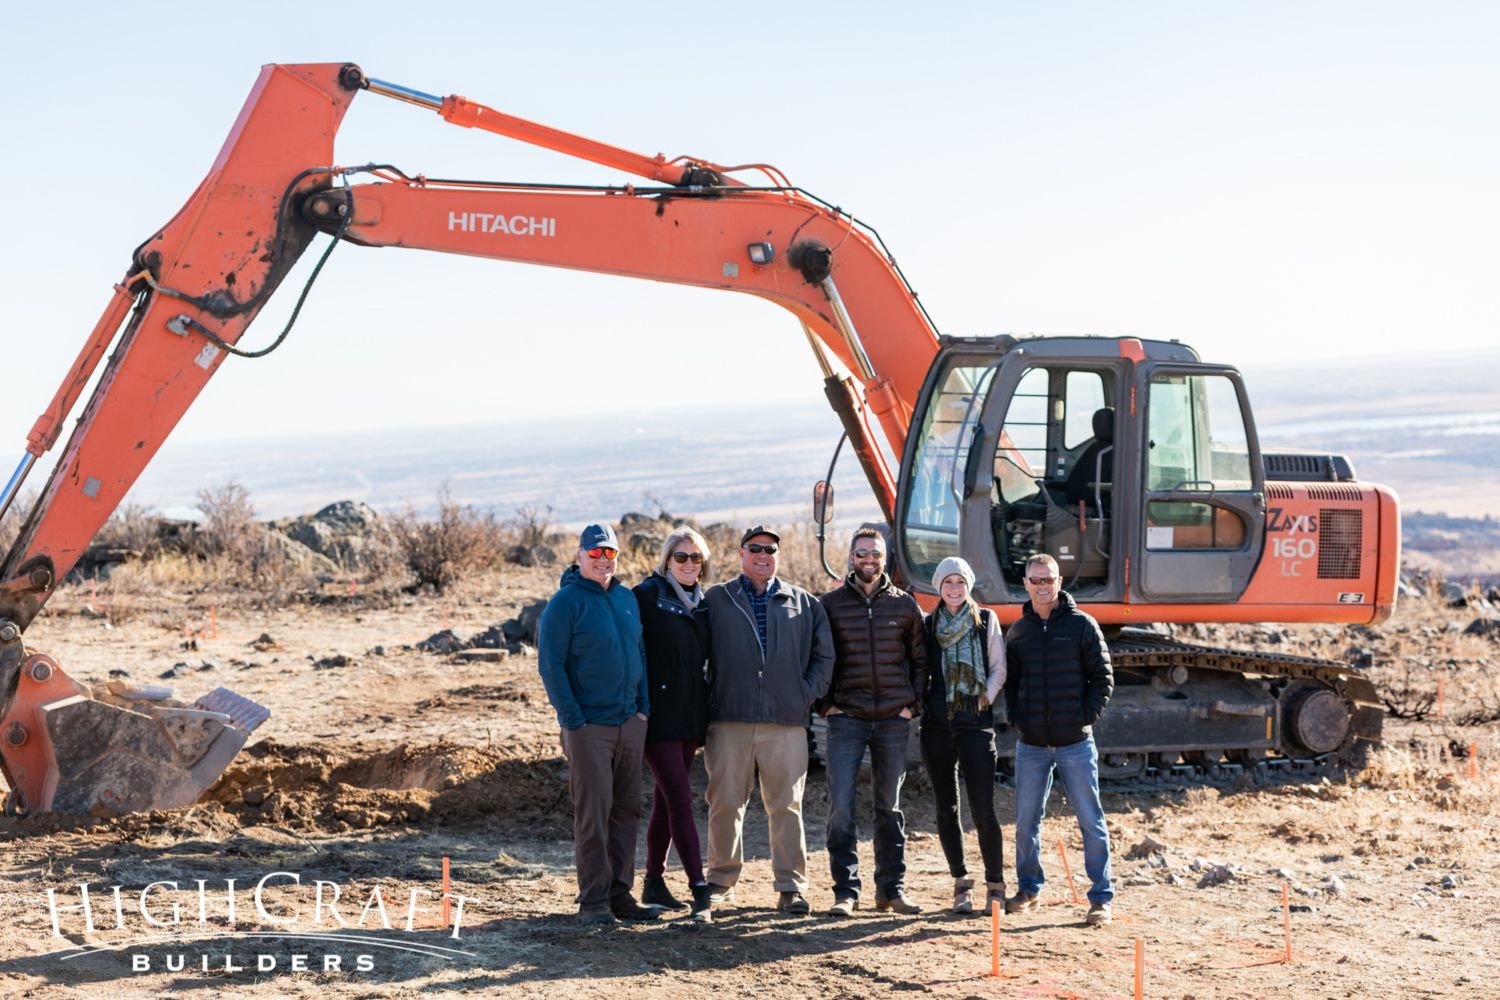 custom-home-groundbreaking-northern-colorado-HighCraft-design-build-team-with-clients